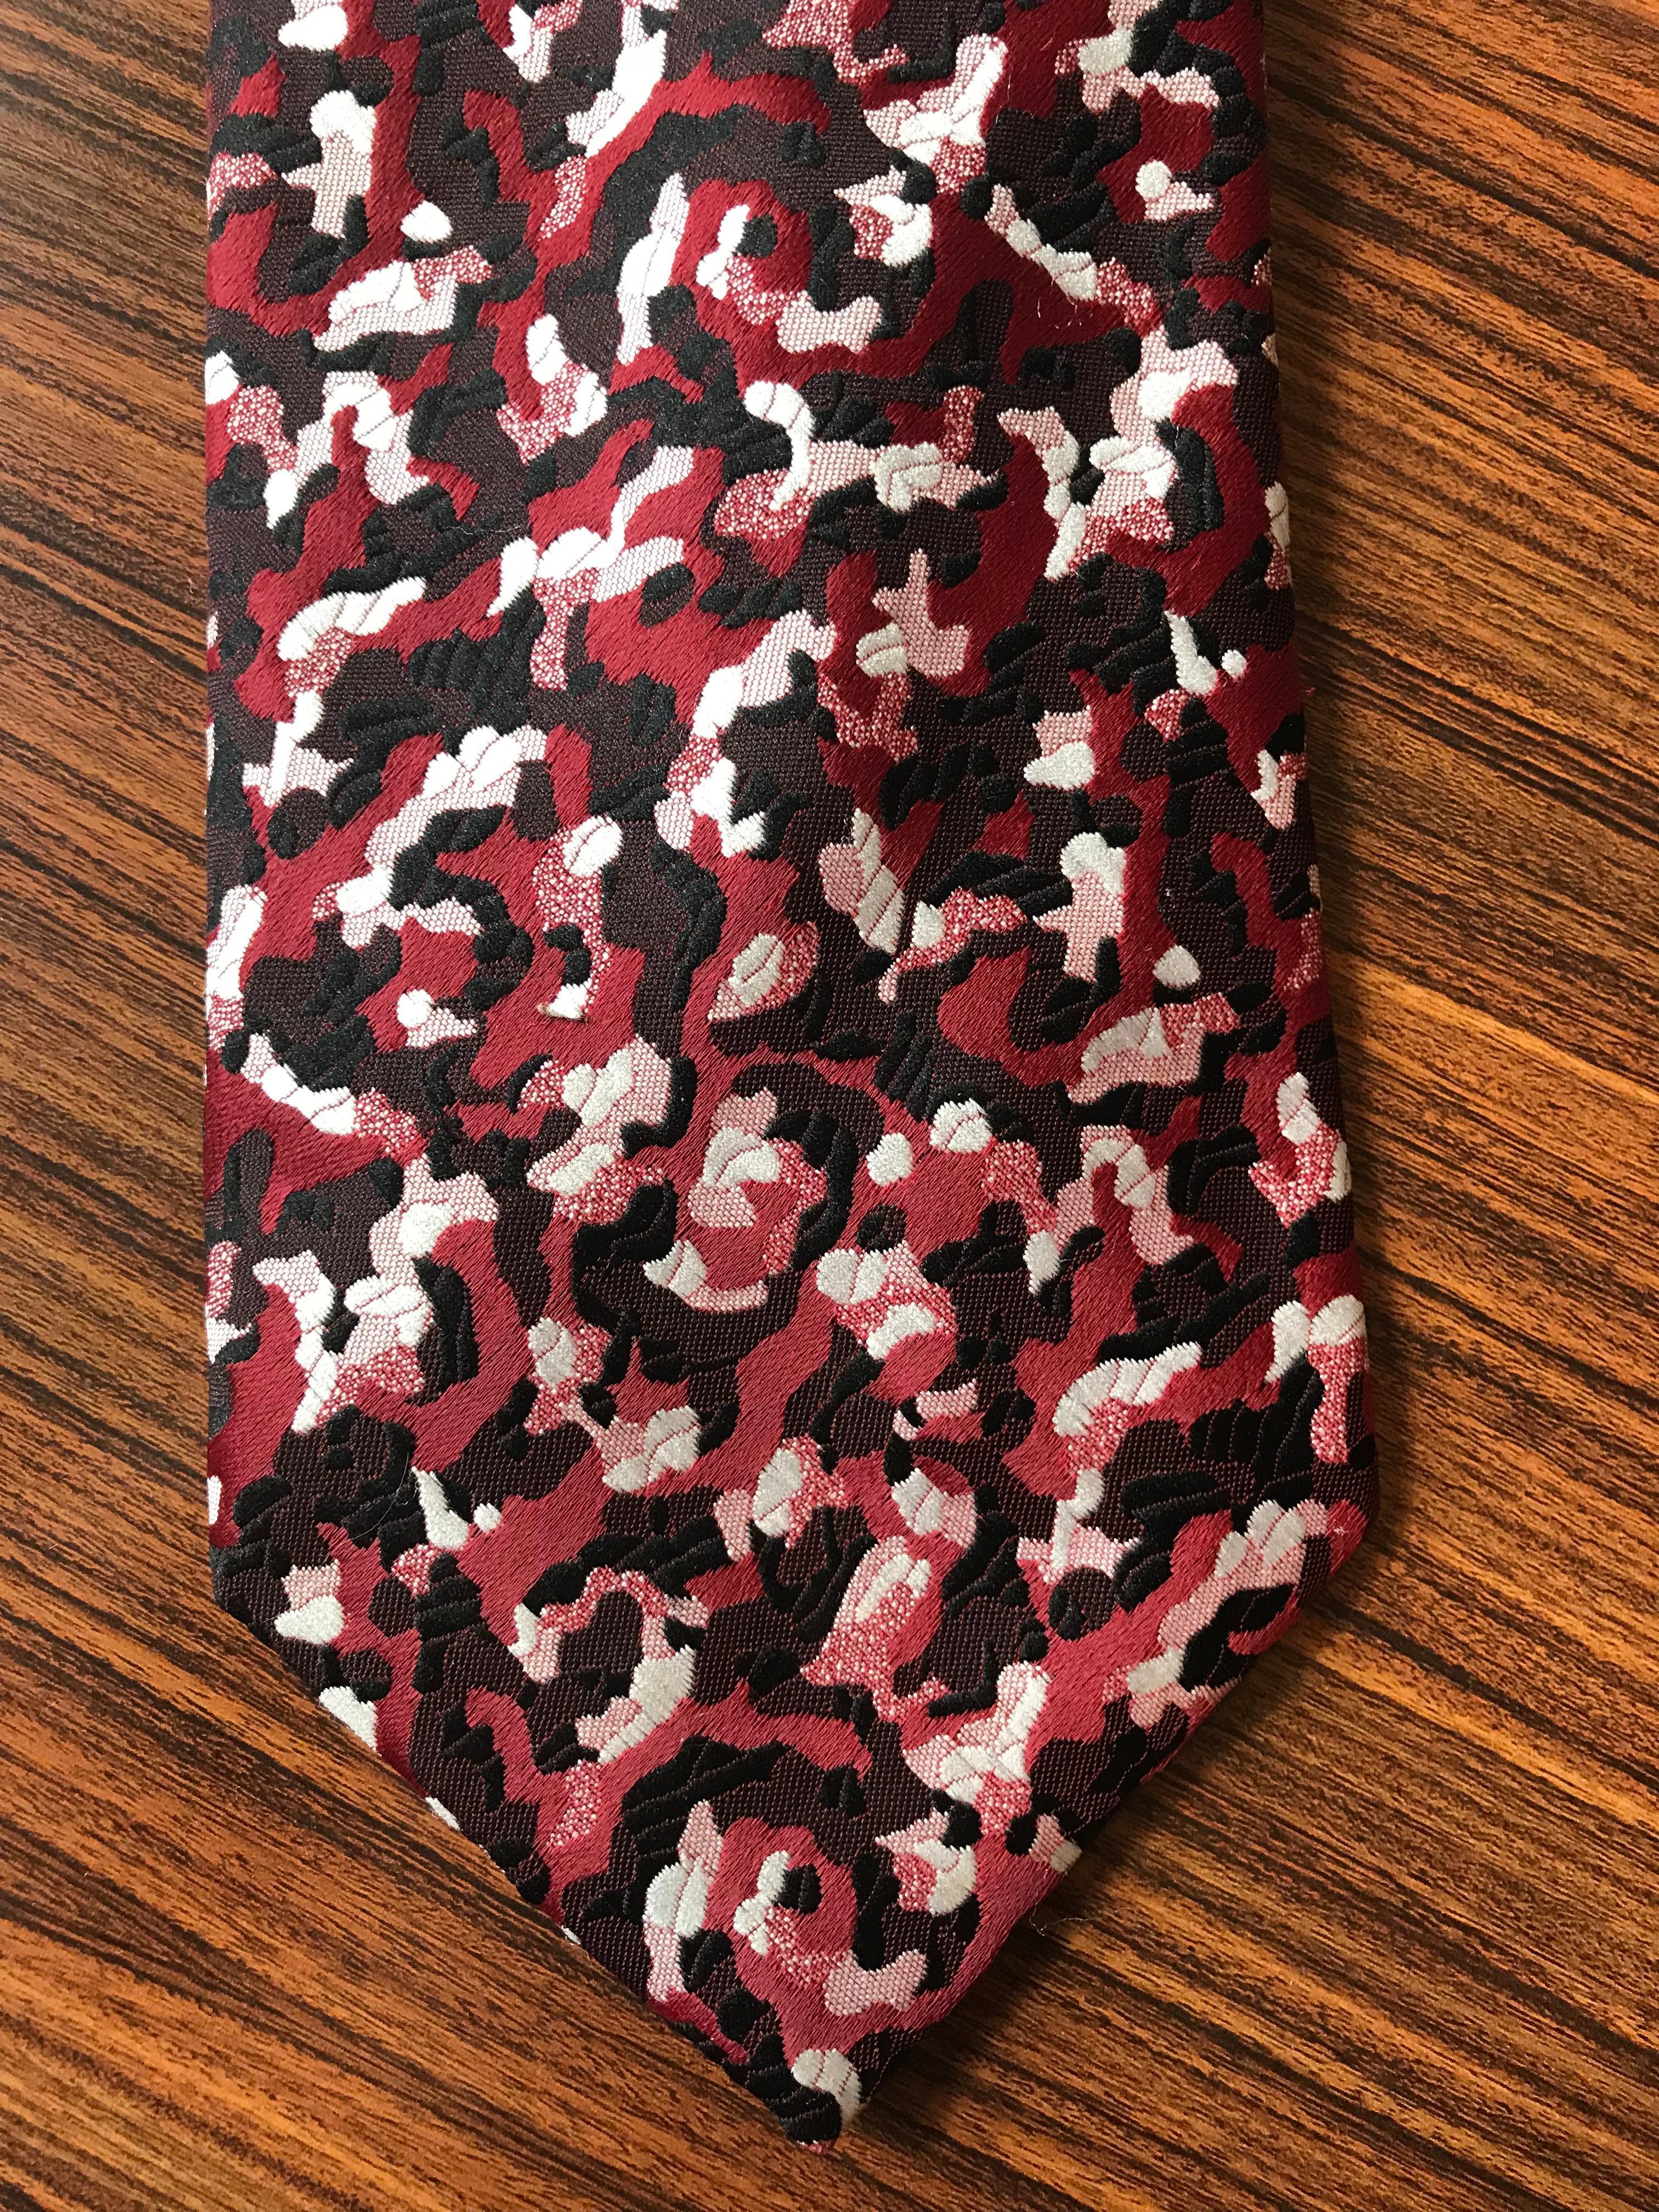 Schiaparelli 1970s tie in a beautiful red (the color of a fresh ripe cherry) black and white pattern created for the now defunct Michigan department store Hughes & Hatcher. Signed Schiaparelli at label and throughout lining.

Measures 4 1/4